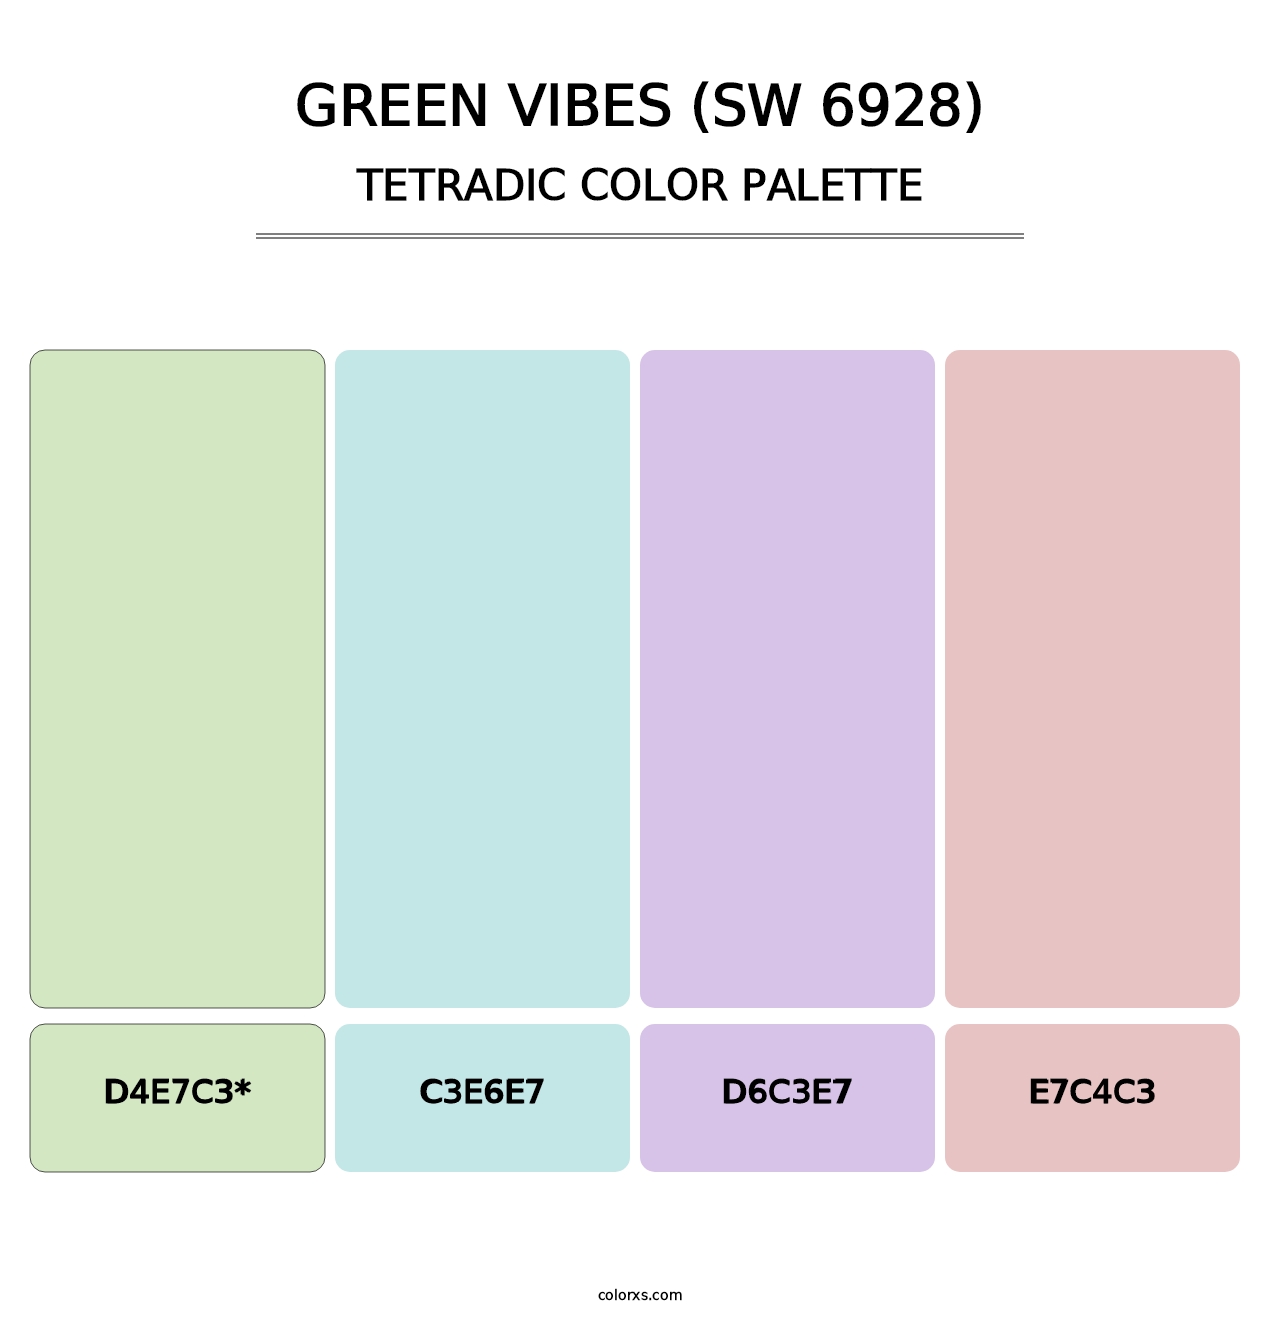 Green Vibes (SW 6928) - Tetradic Color Palette